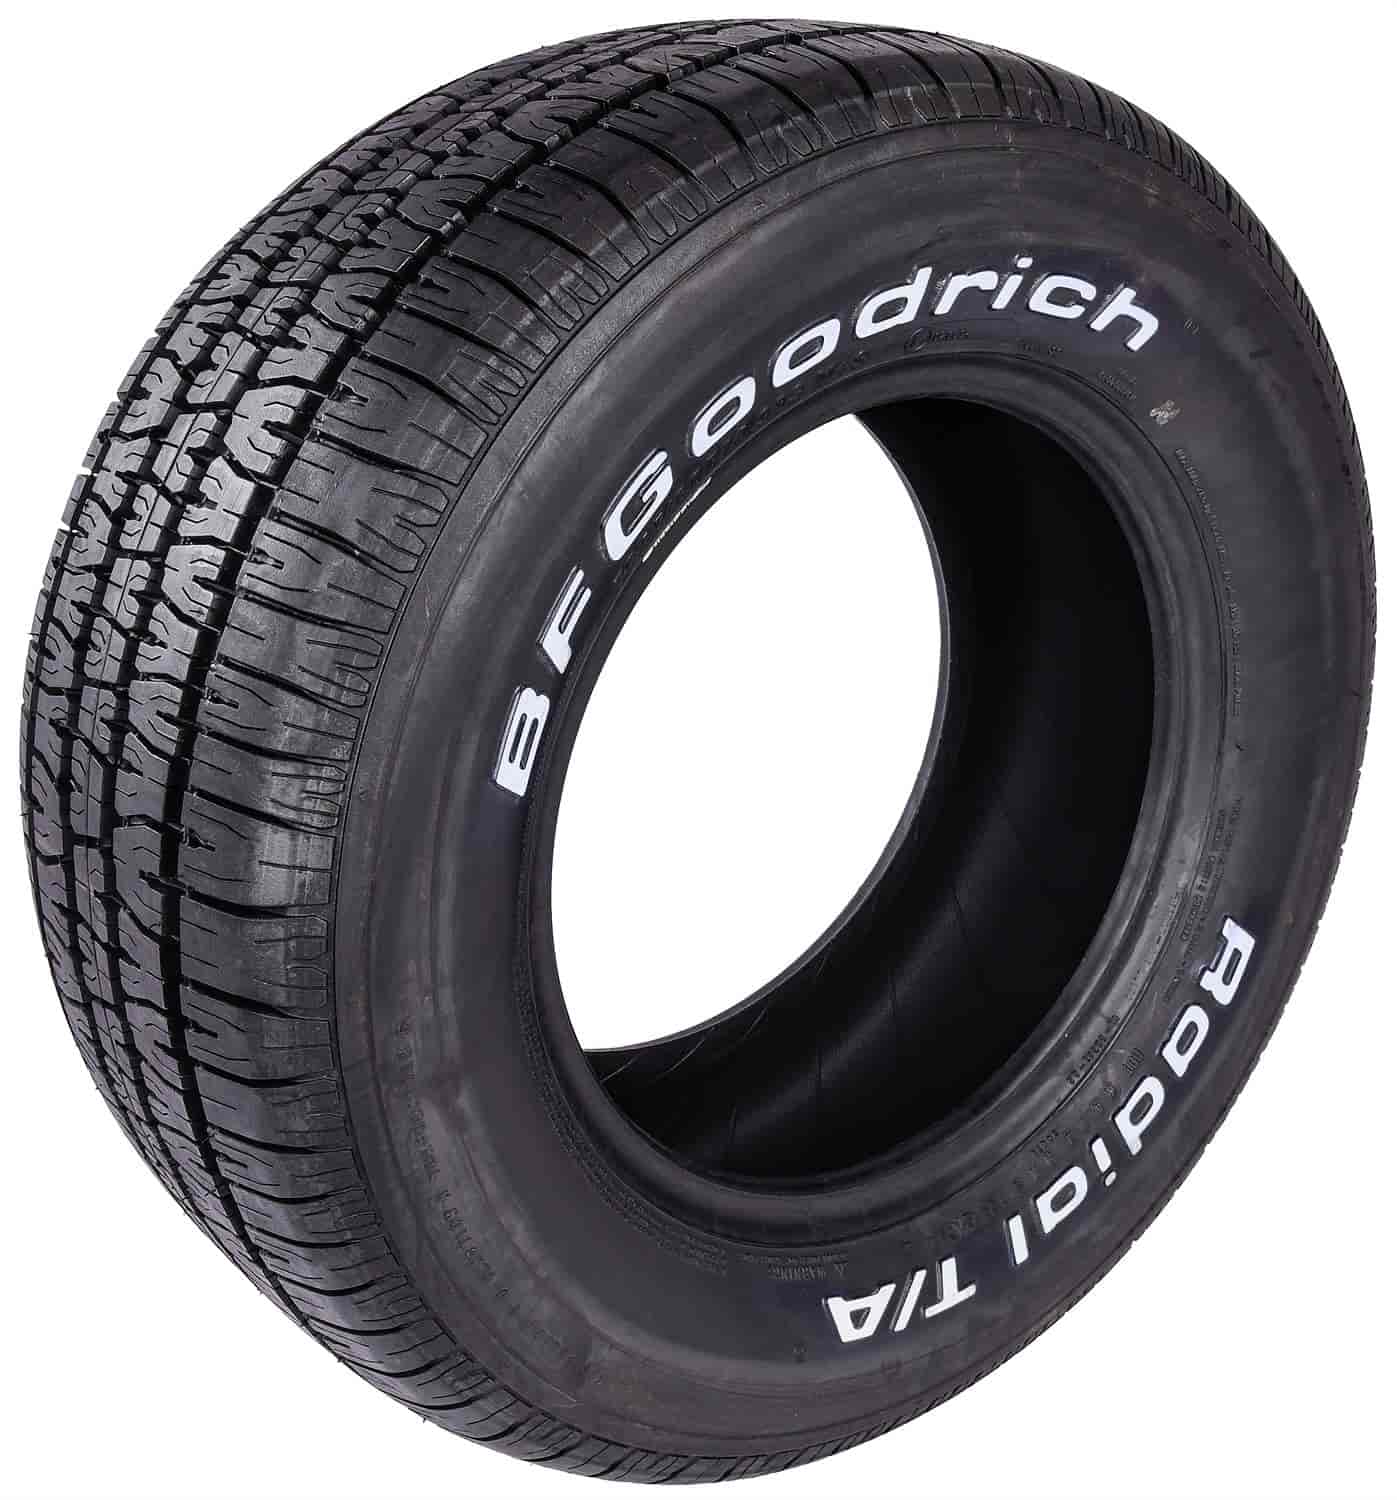 Radial T/A Tire P245/60R14